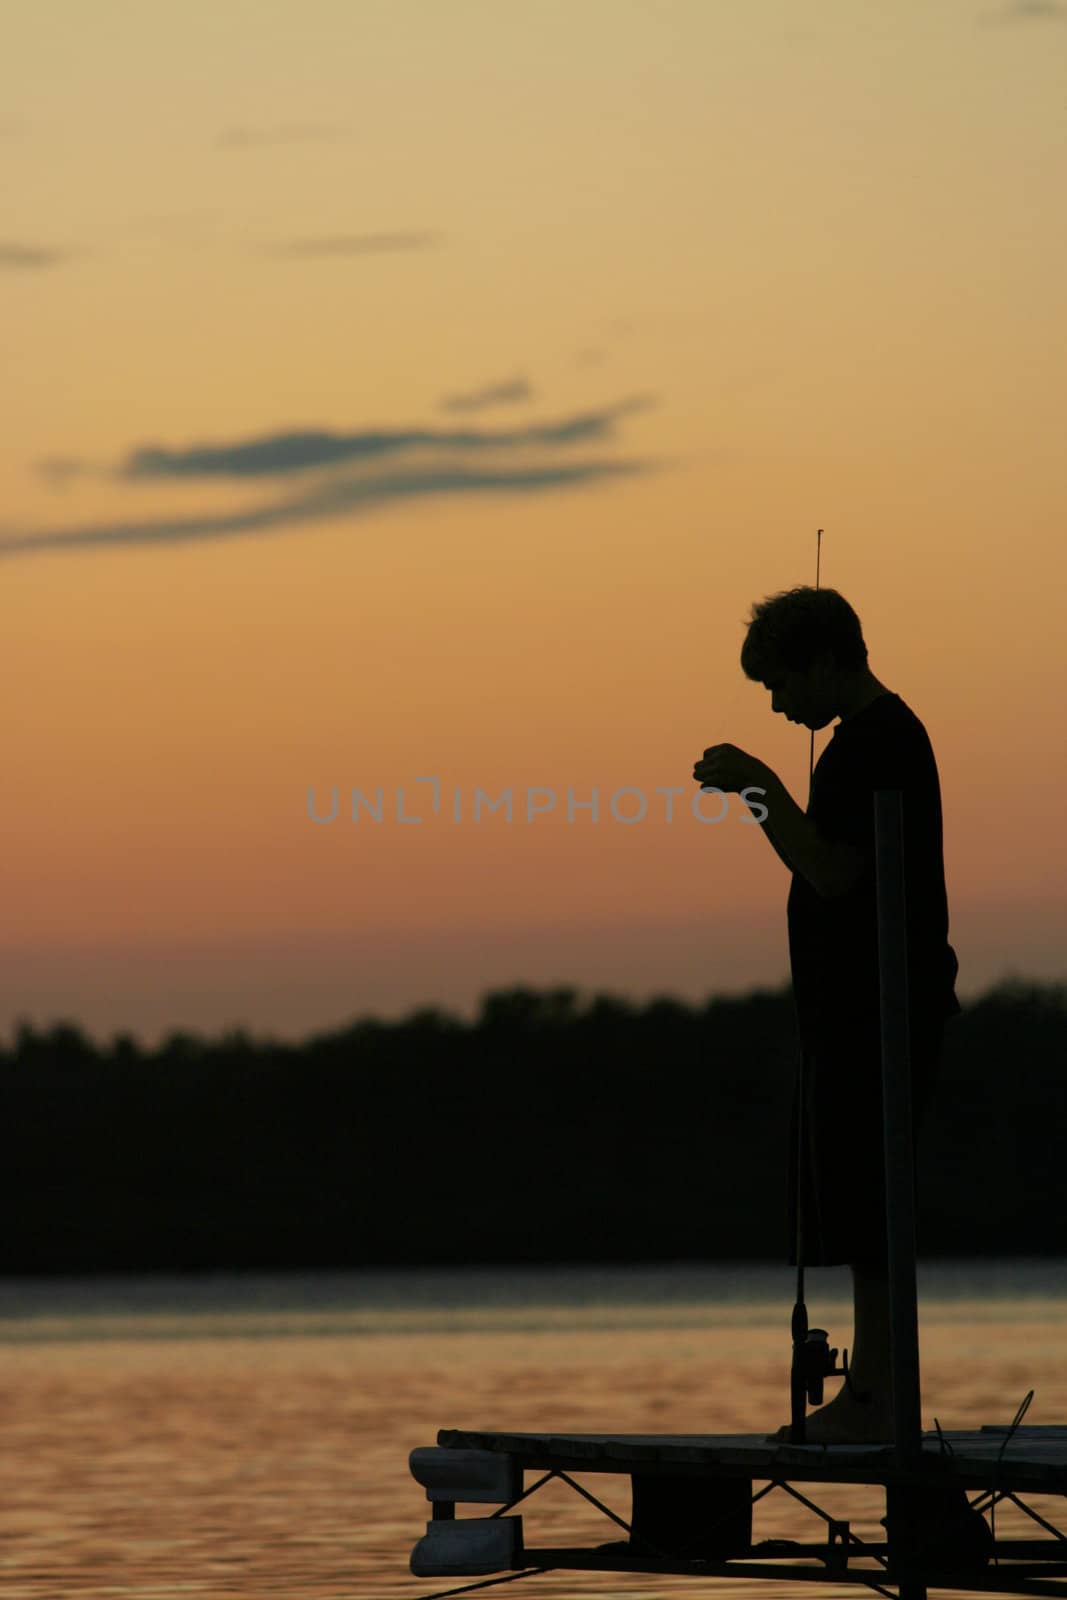 Silhouette of boy fishing off pier at sunset